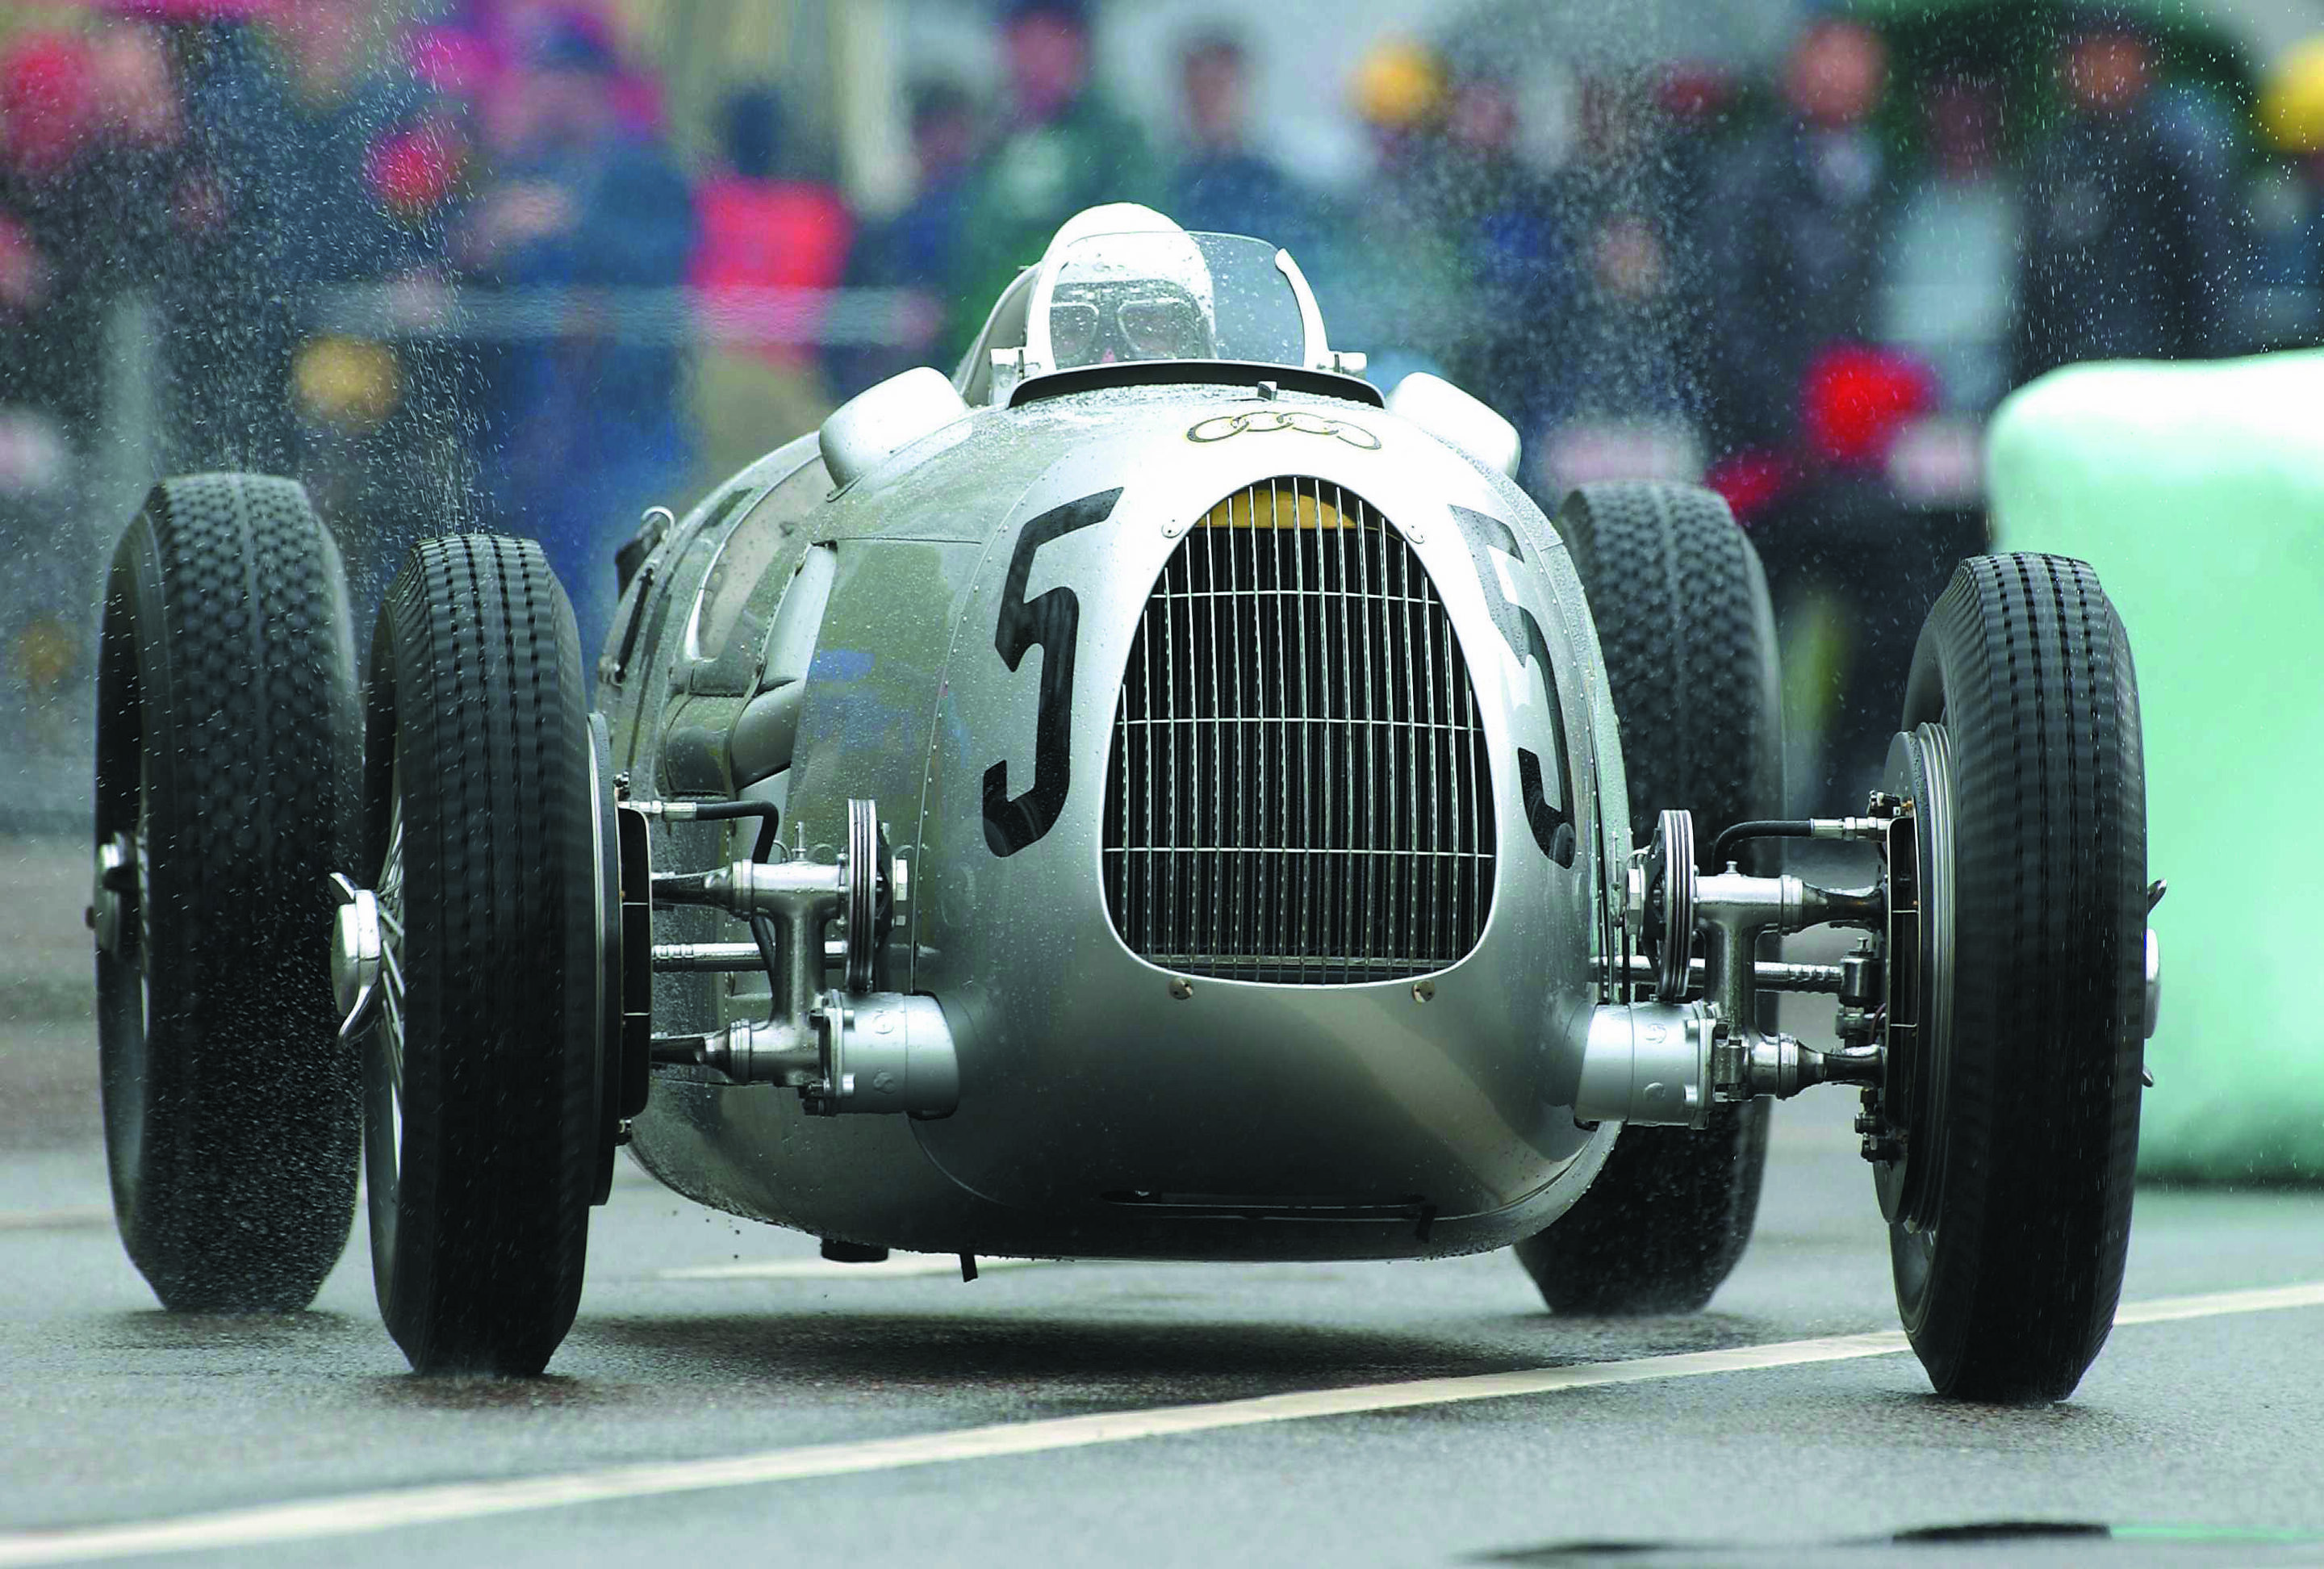 Donau-Ring 2002: Auto union 16-cylinder Type C racing car from 1936